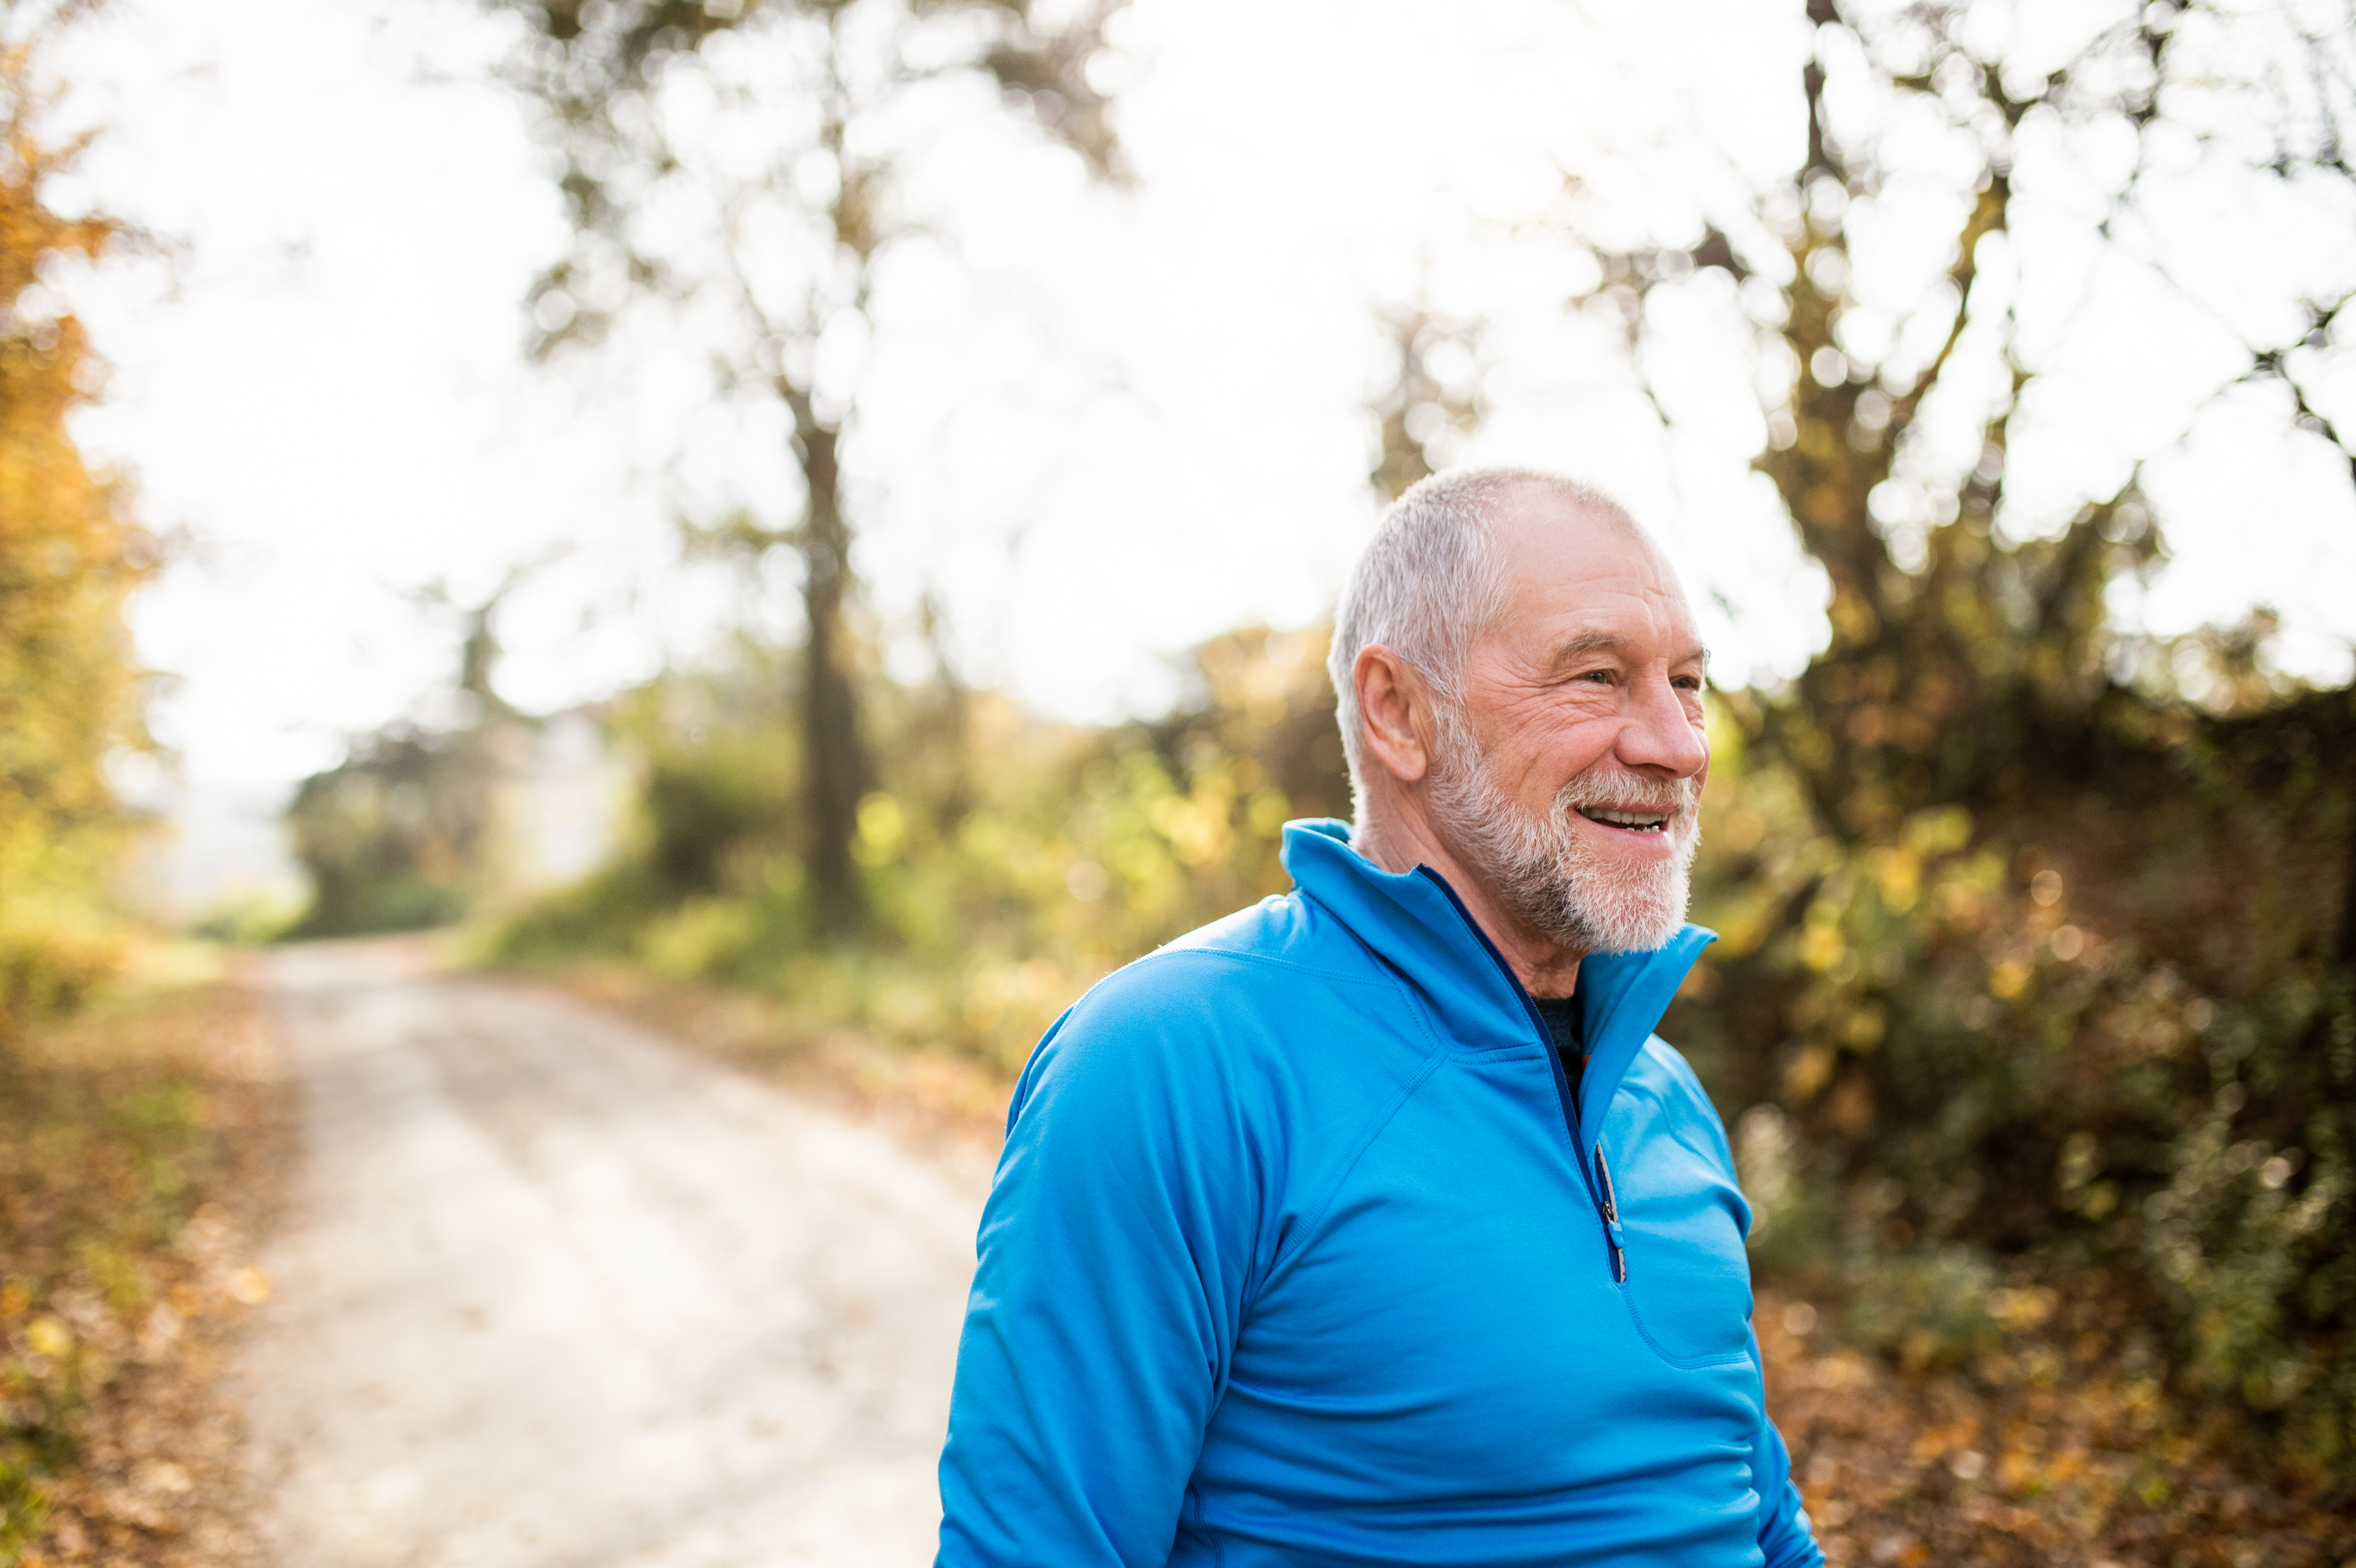 After Prostate Removal, Men Can Benefit from Pelvic Floor Therapy